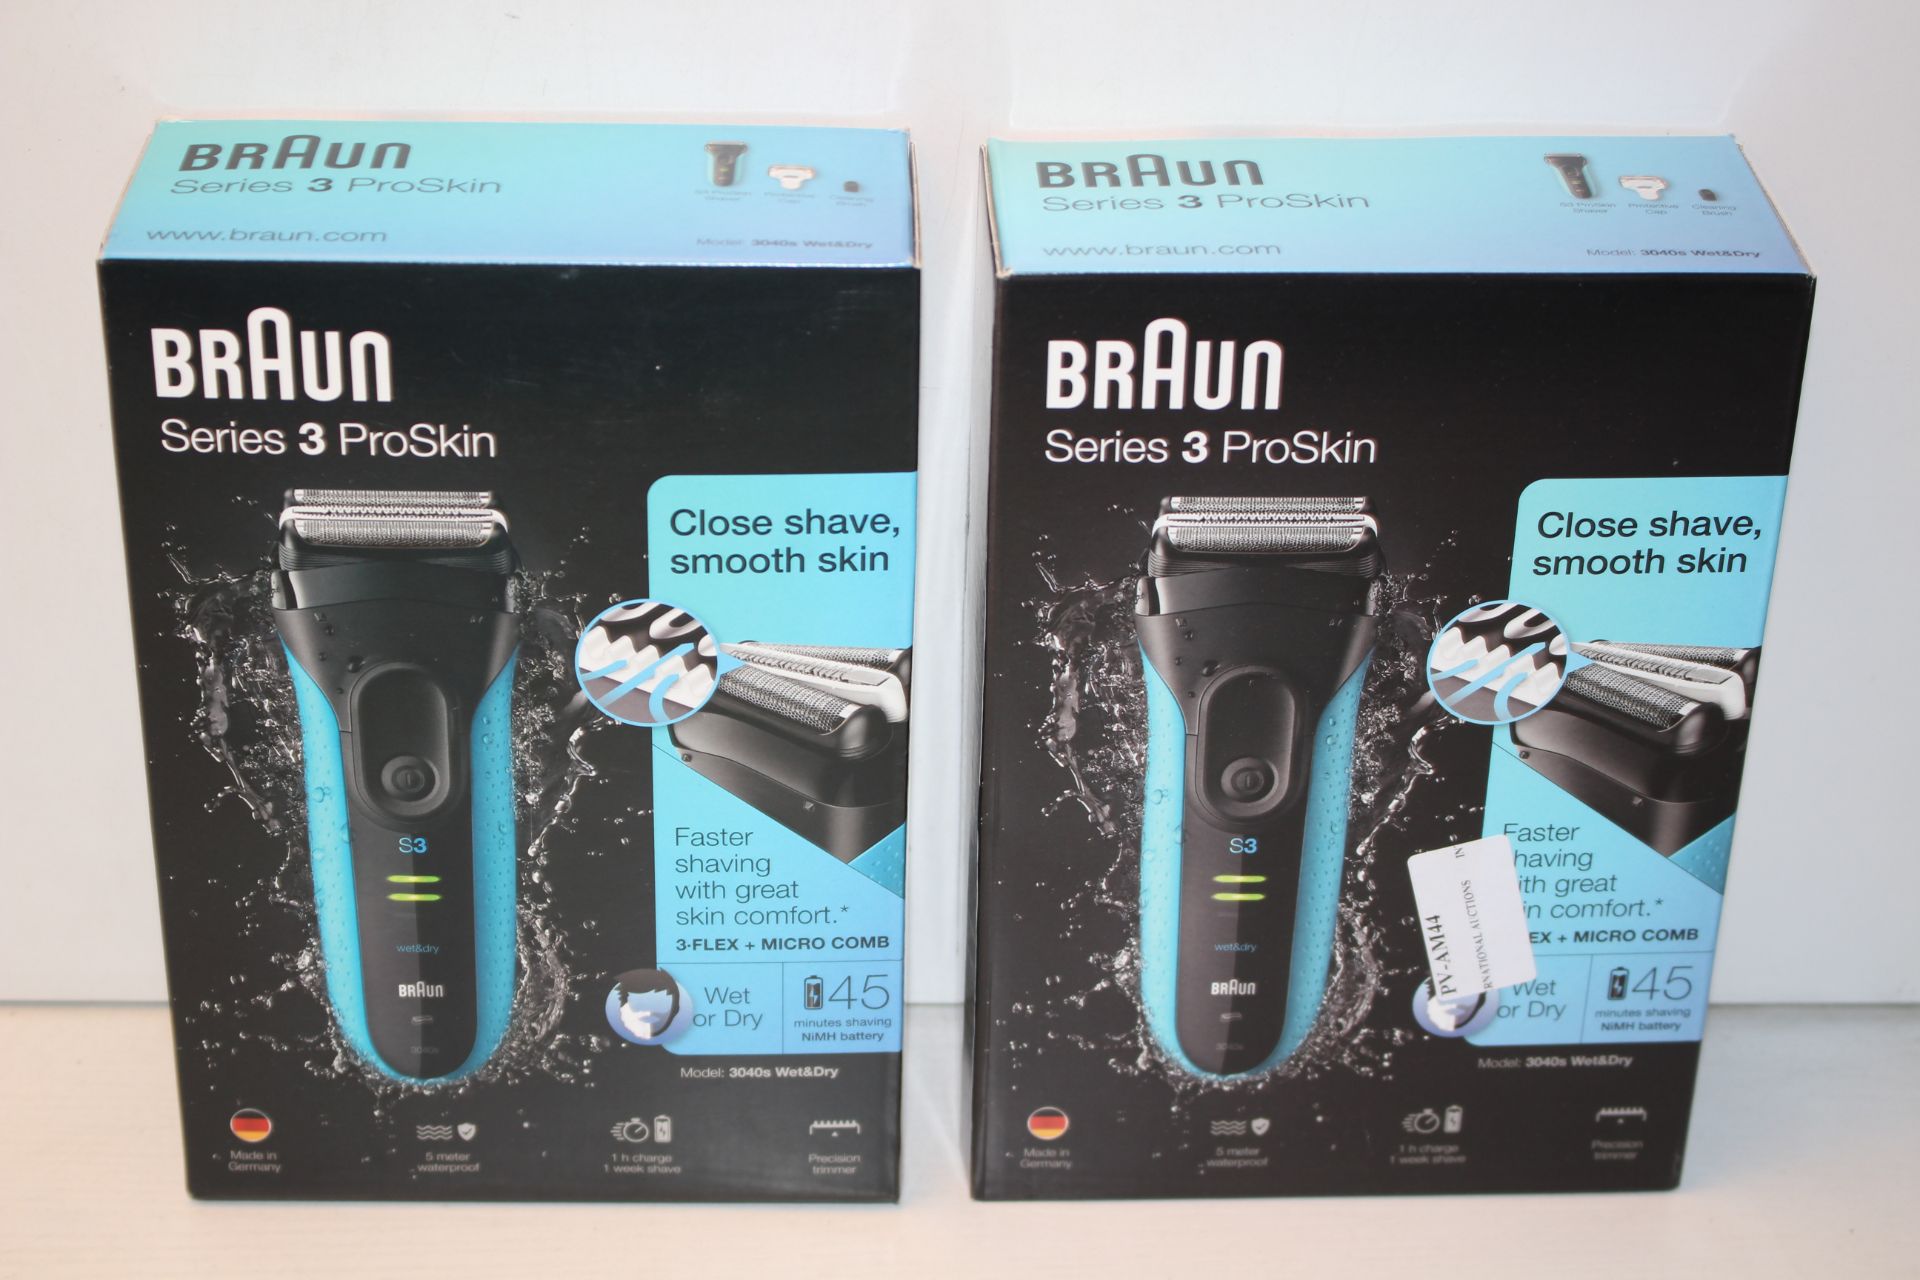 2X BOXED BRAUN SERIES 3 PROSKIN WET & DRY SHAVERS MODEL: 3040S RRP £54.99 EACHCondition